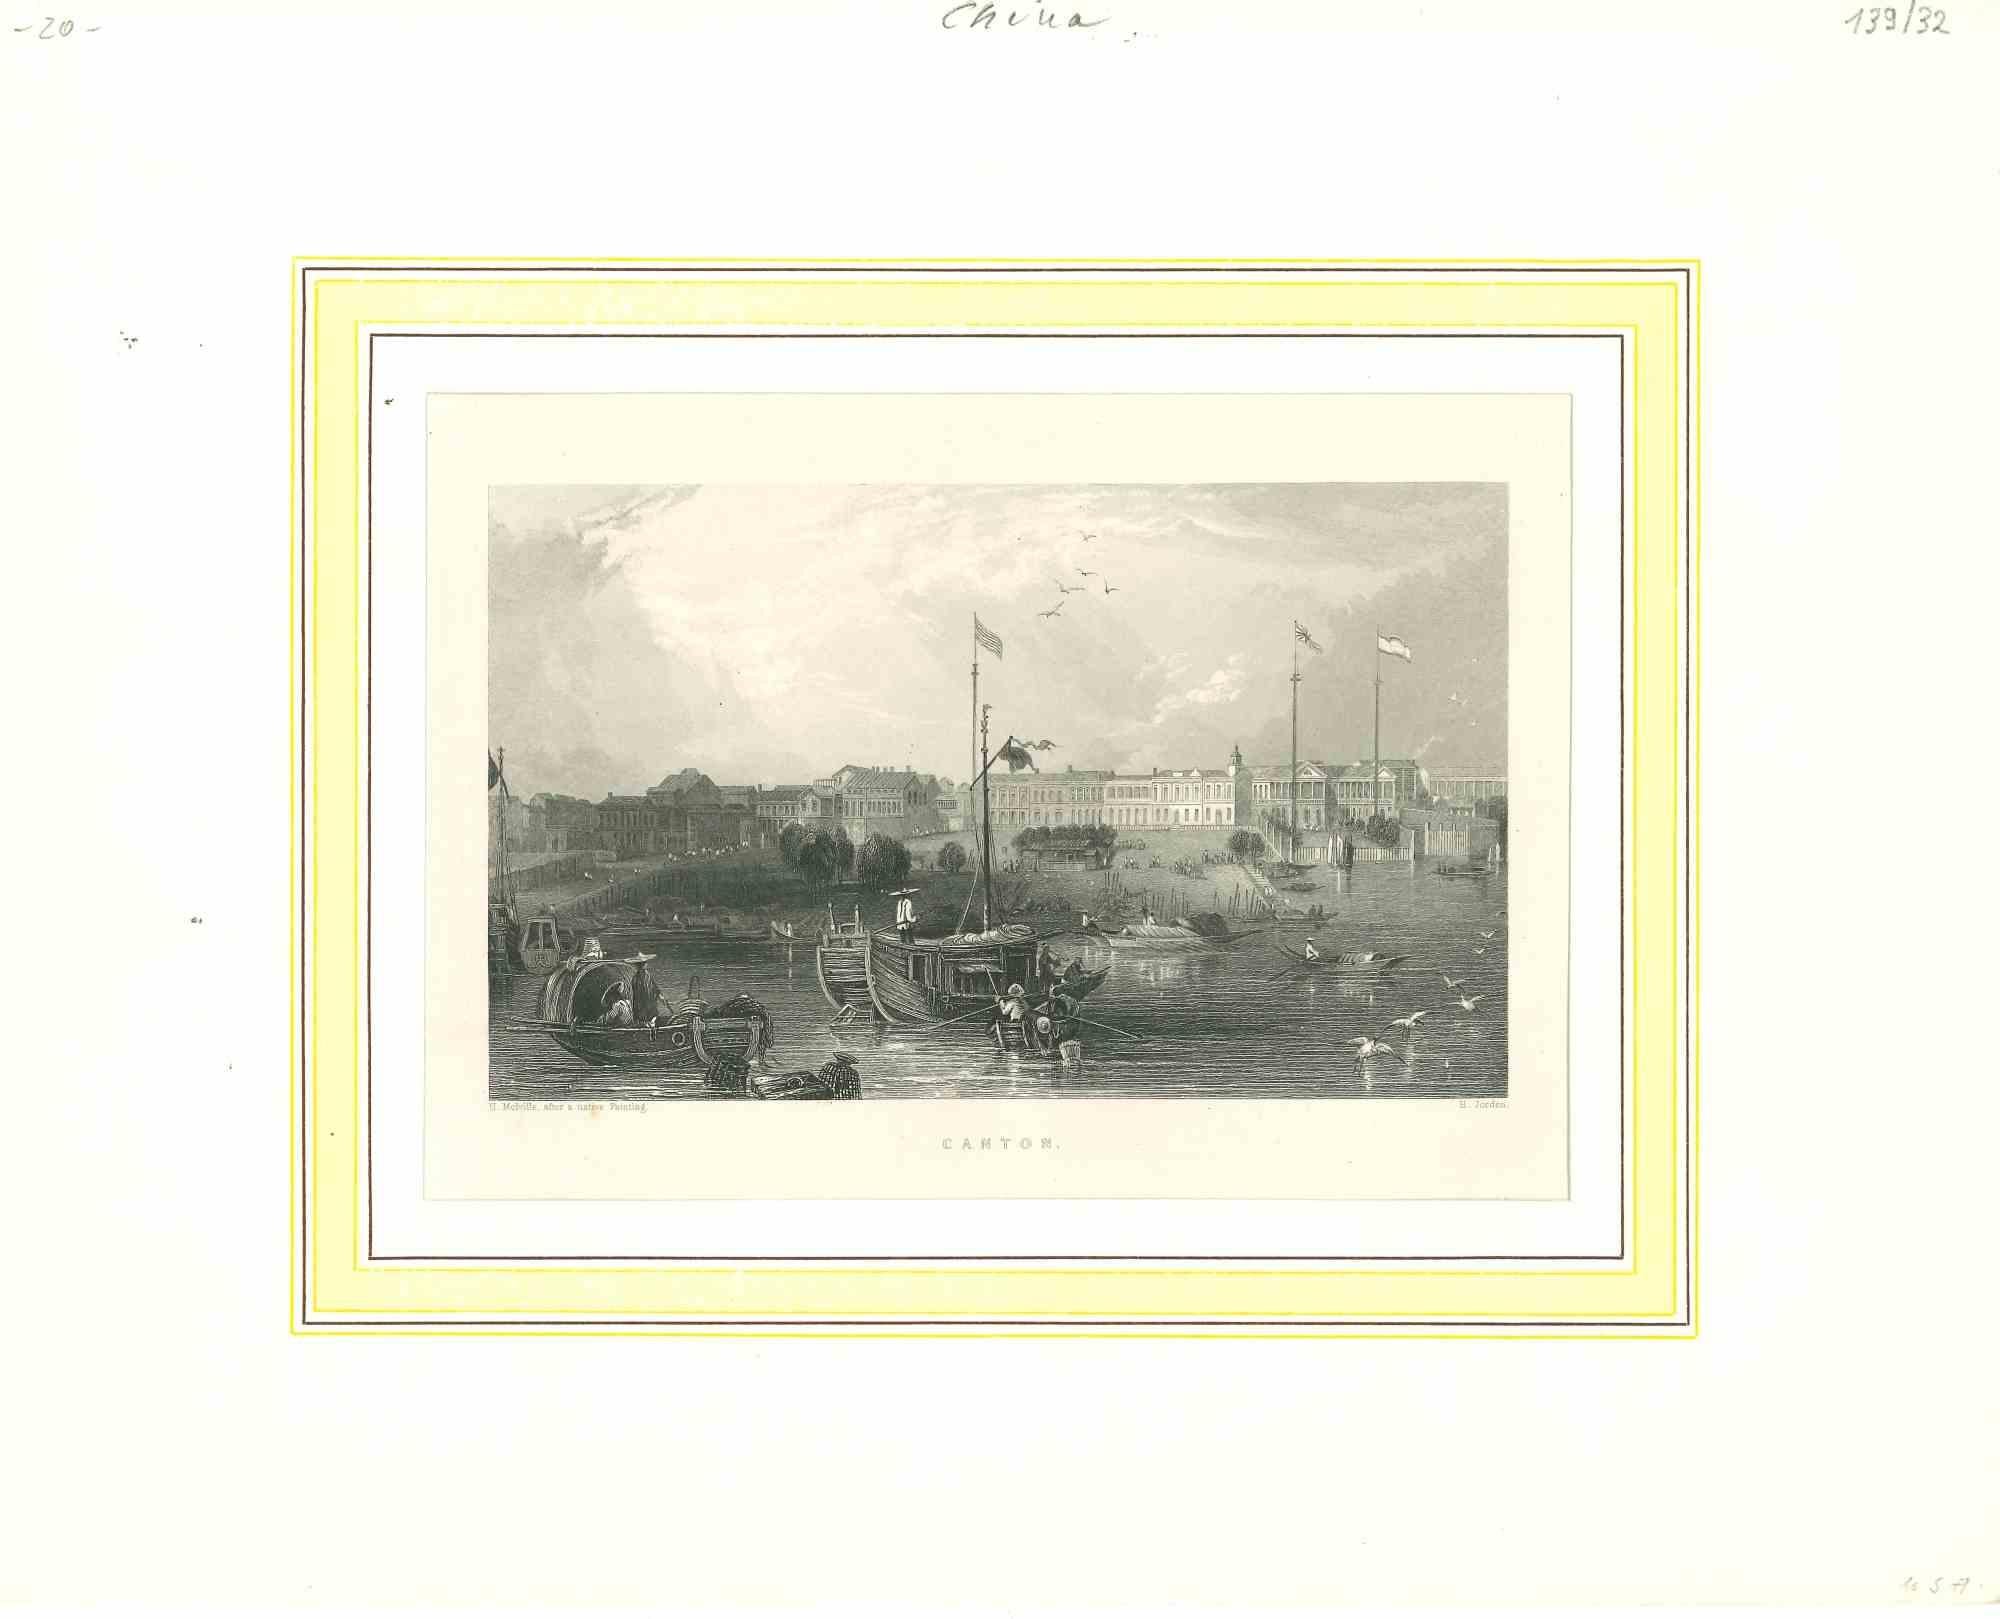 Unknown Figurative Print - Ancient View of Canton - Original Lithograph on paper - Mid-19th Century